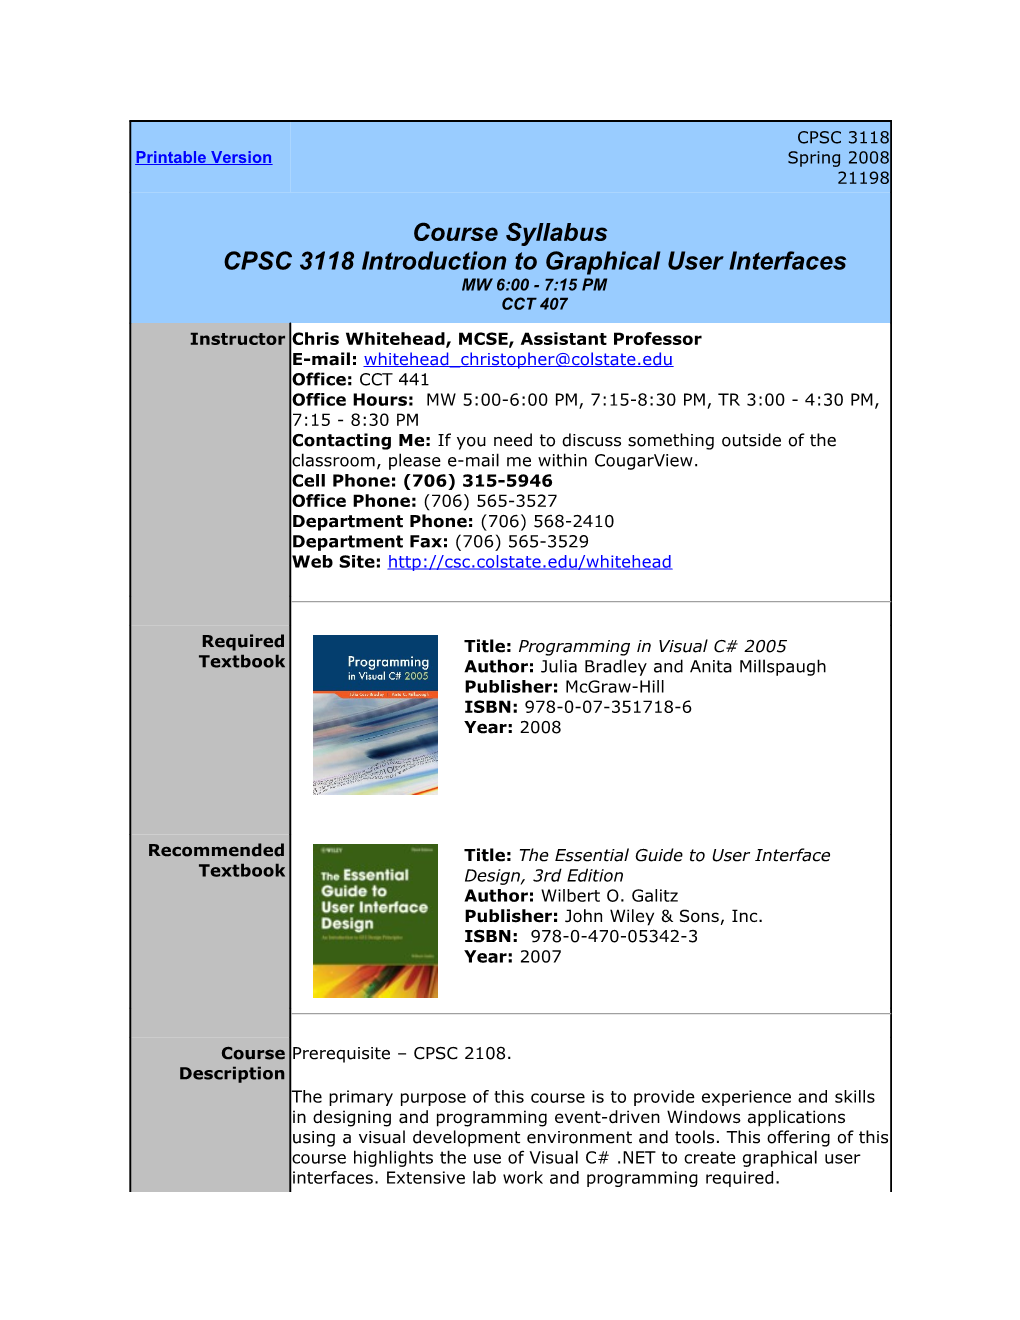 Course Syllabuscpsc 3118 Introduction to Graphical User Interfacesmw 6:00 - 7:15 PMCCT 407